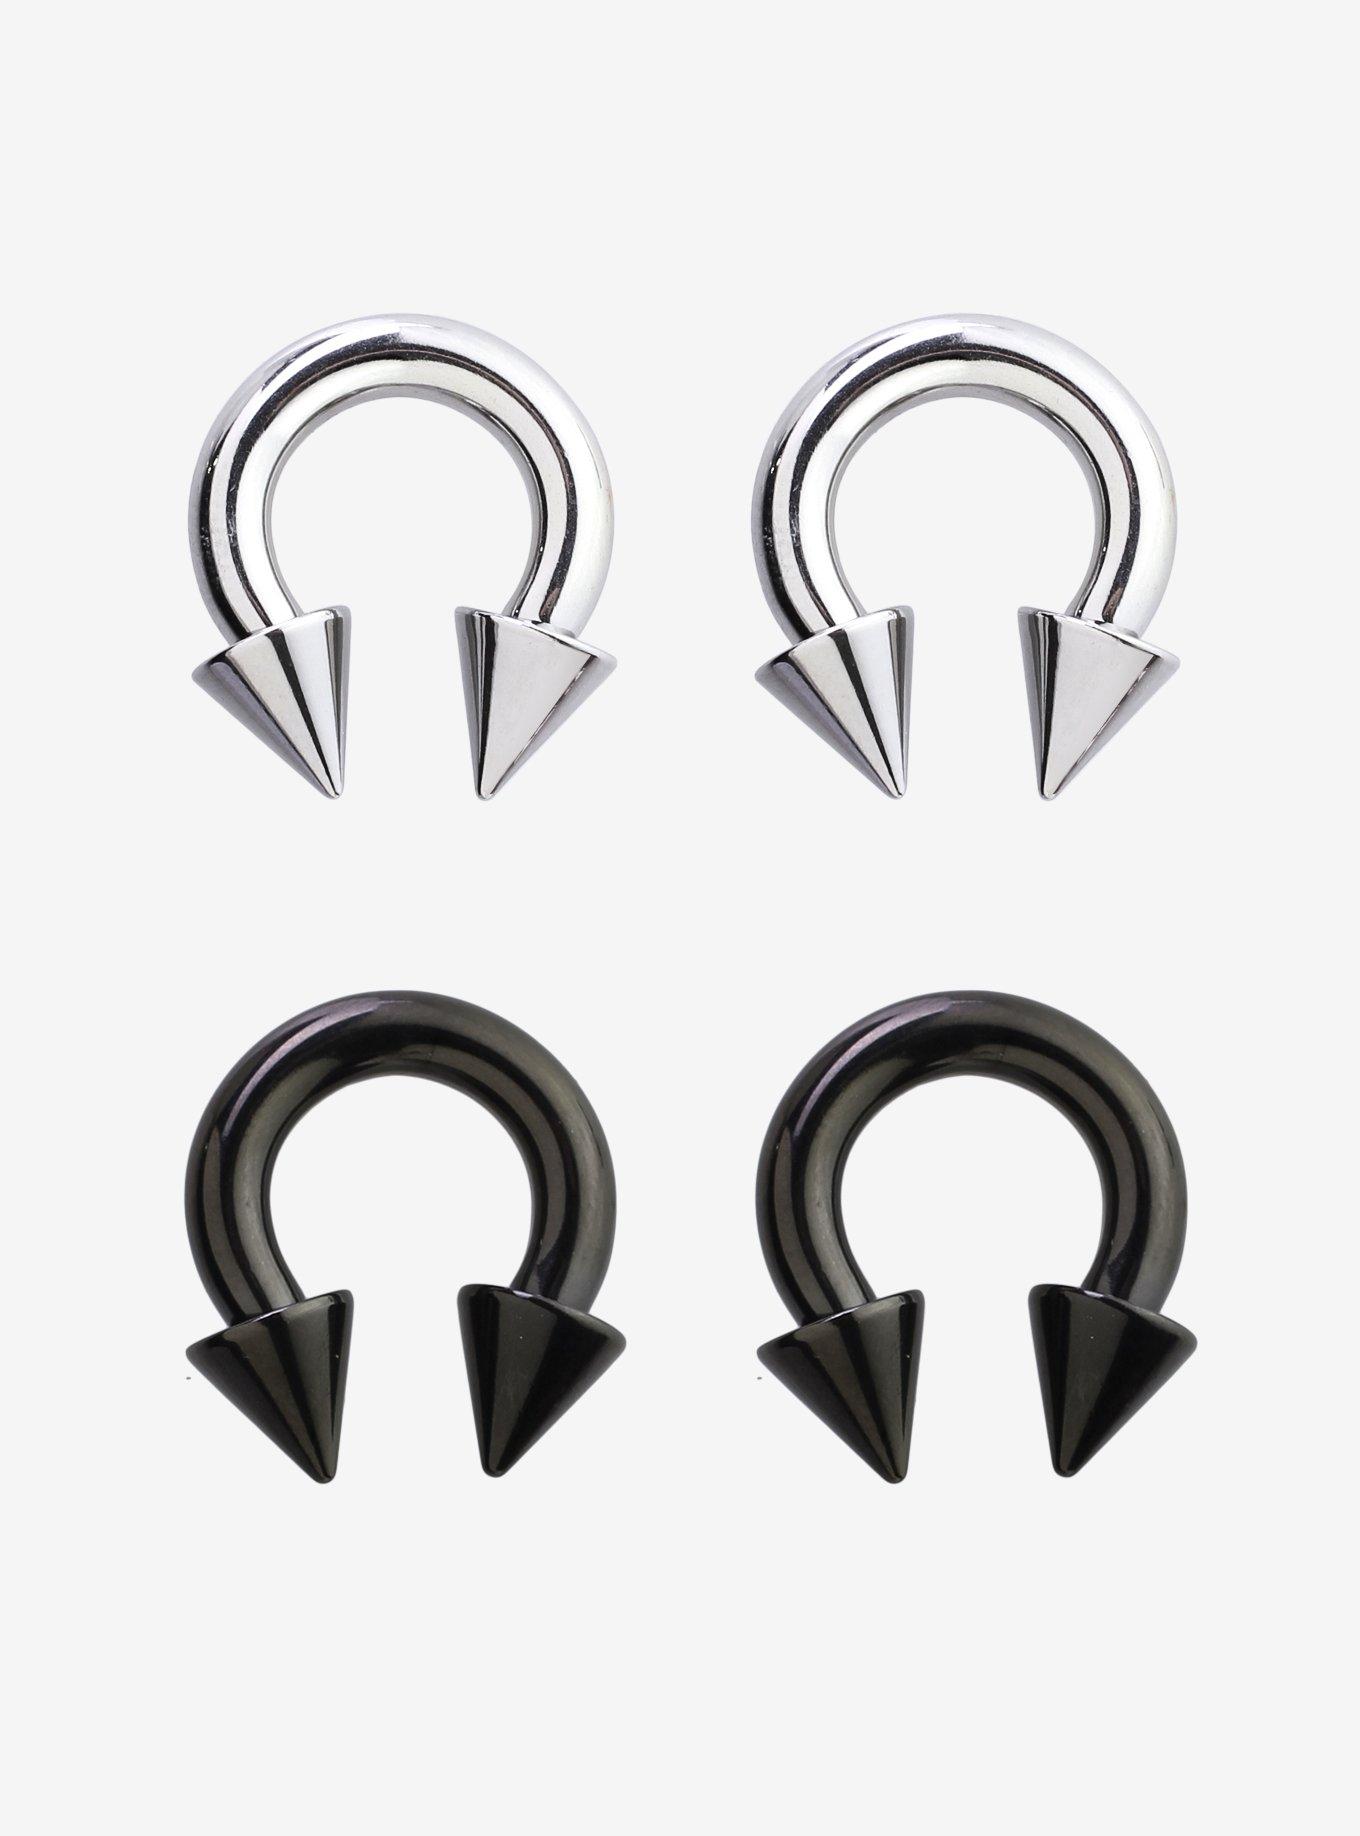 6G Steel Silver And Black Circular Barbell With Spike Ends 4 Pack, , hi-res